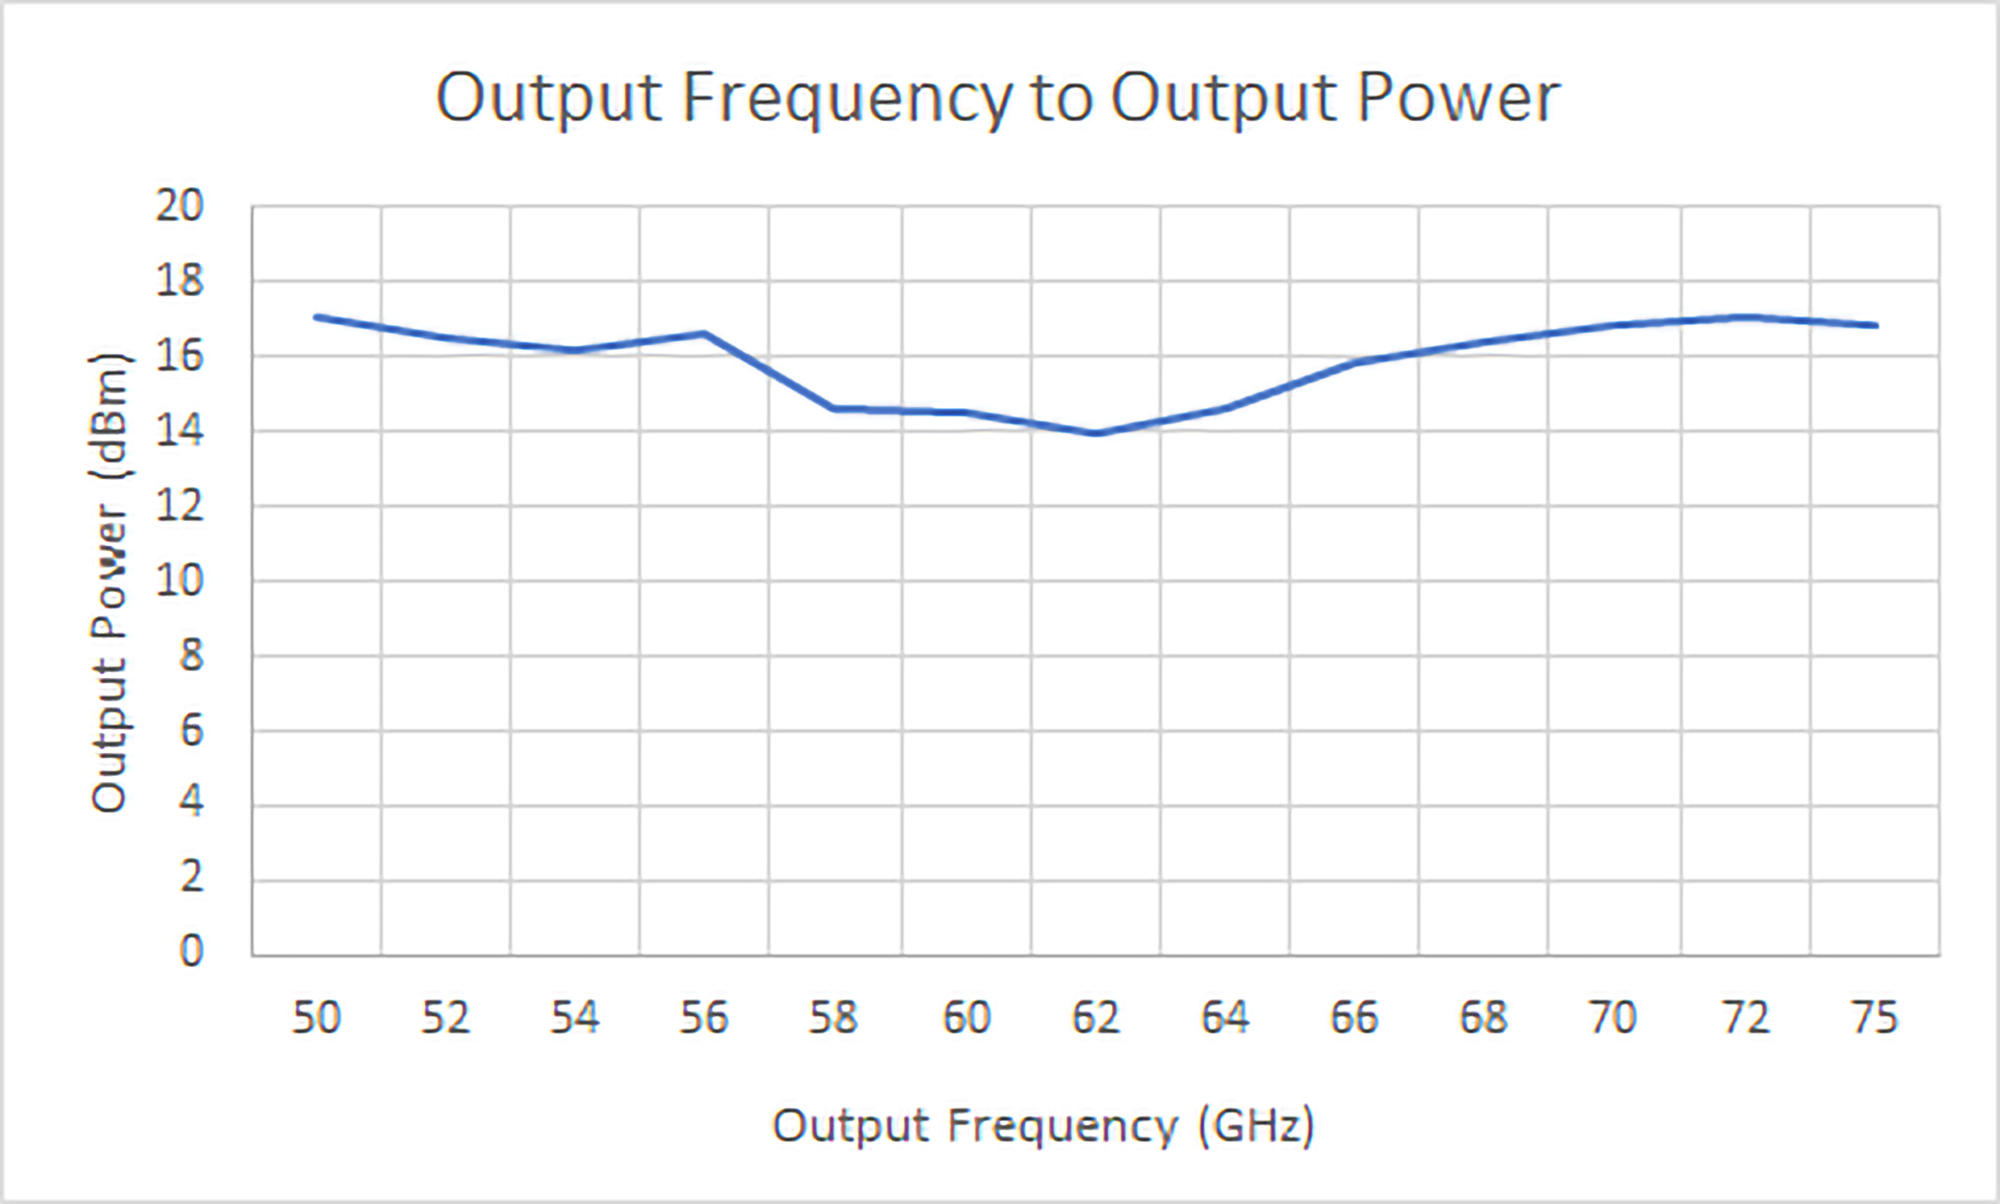 hwfm15-sf4x13-power-frequency-graph.png